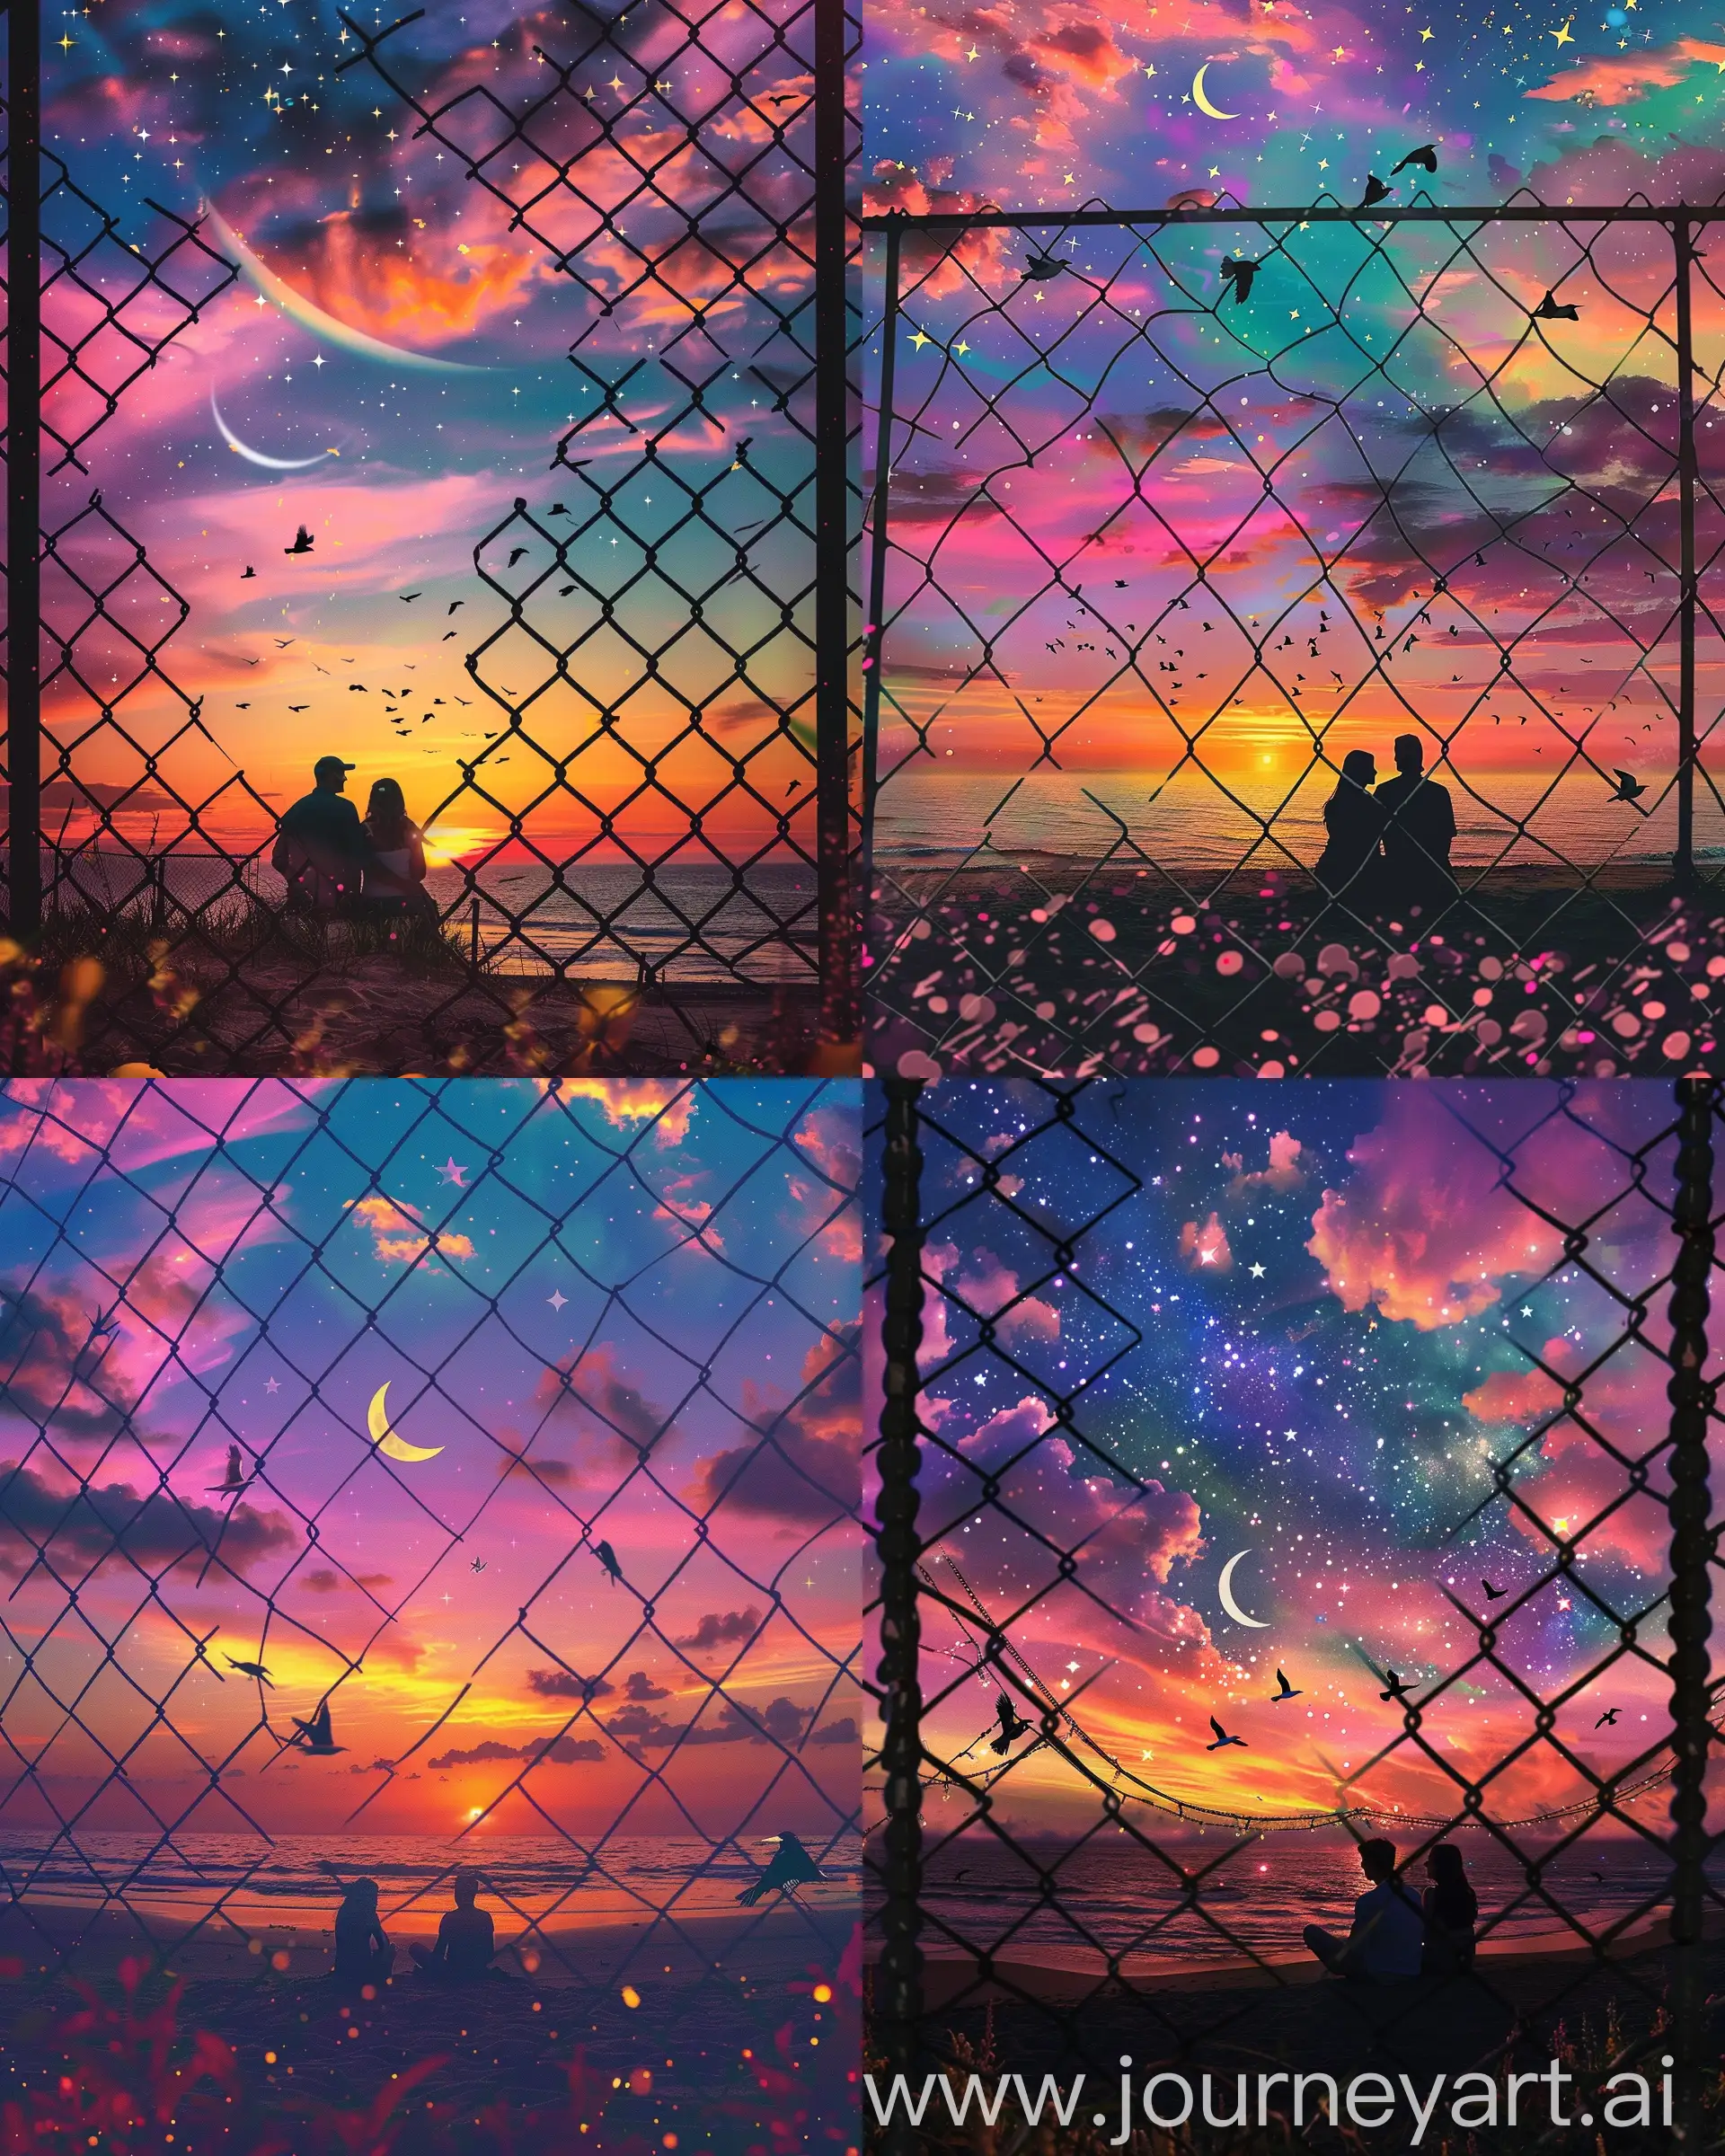 photo of couple sitting on beach, sunset sky with crescent moon and stars colorful clouds flying birds horizon line of ocean seen through chain link fence in the style of collage art pink purple blue yellow orange green --ar 51:64